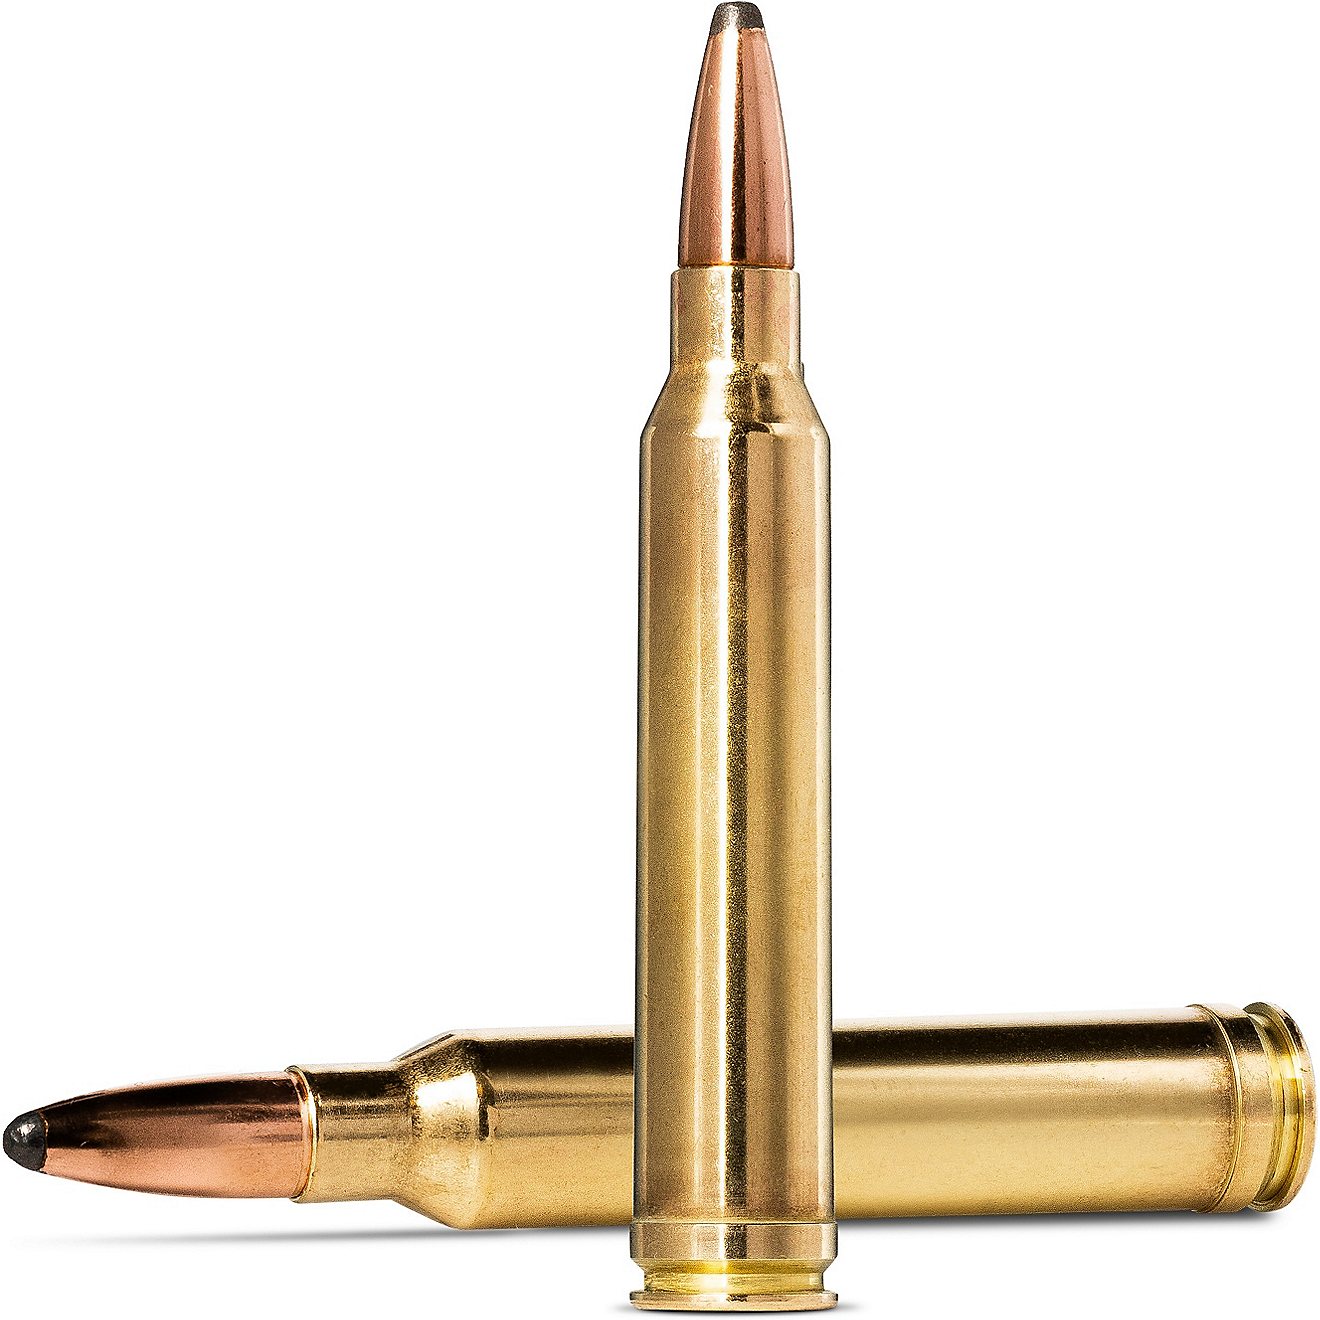 Norma USA Whitetail .300 Winchester Magnum 150-Grain Centerfire Rifle Ammunition - 20 Rounds                                     - view number 1